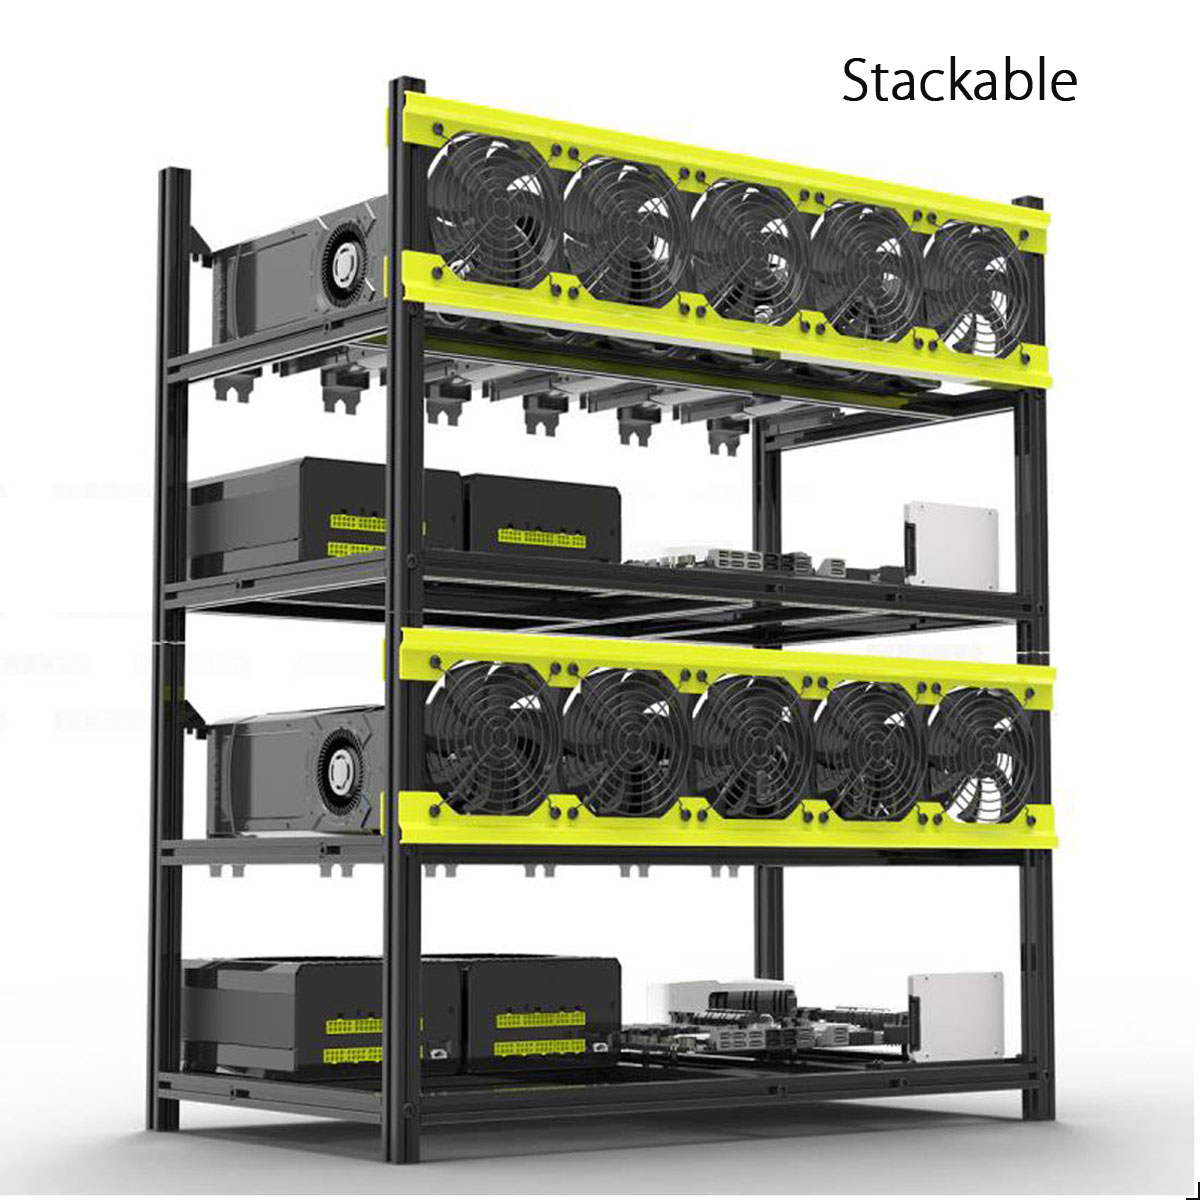 Professional-6-GPU-Mining-Miner-Case-Aluminum-Stackable-Mining-Case-Rig-Open-Air-Frame-1236987